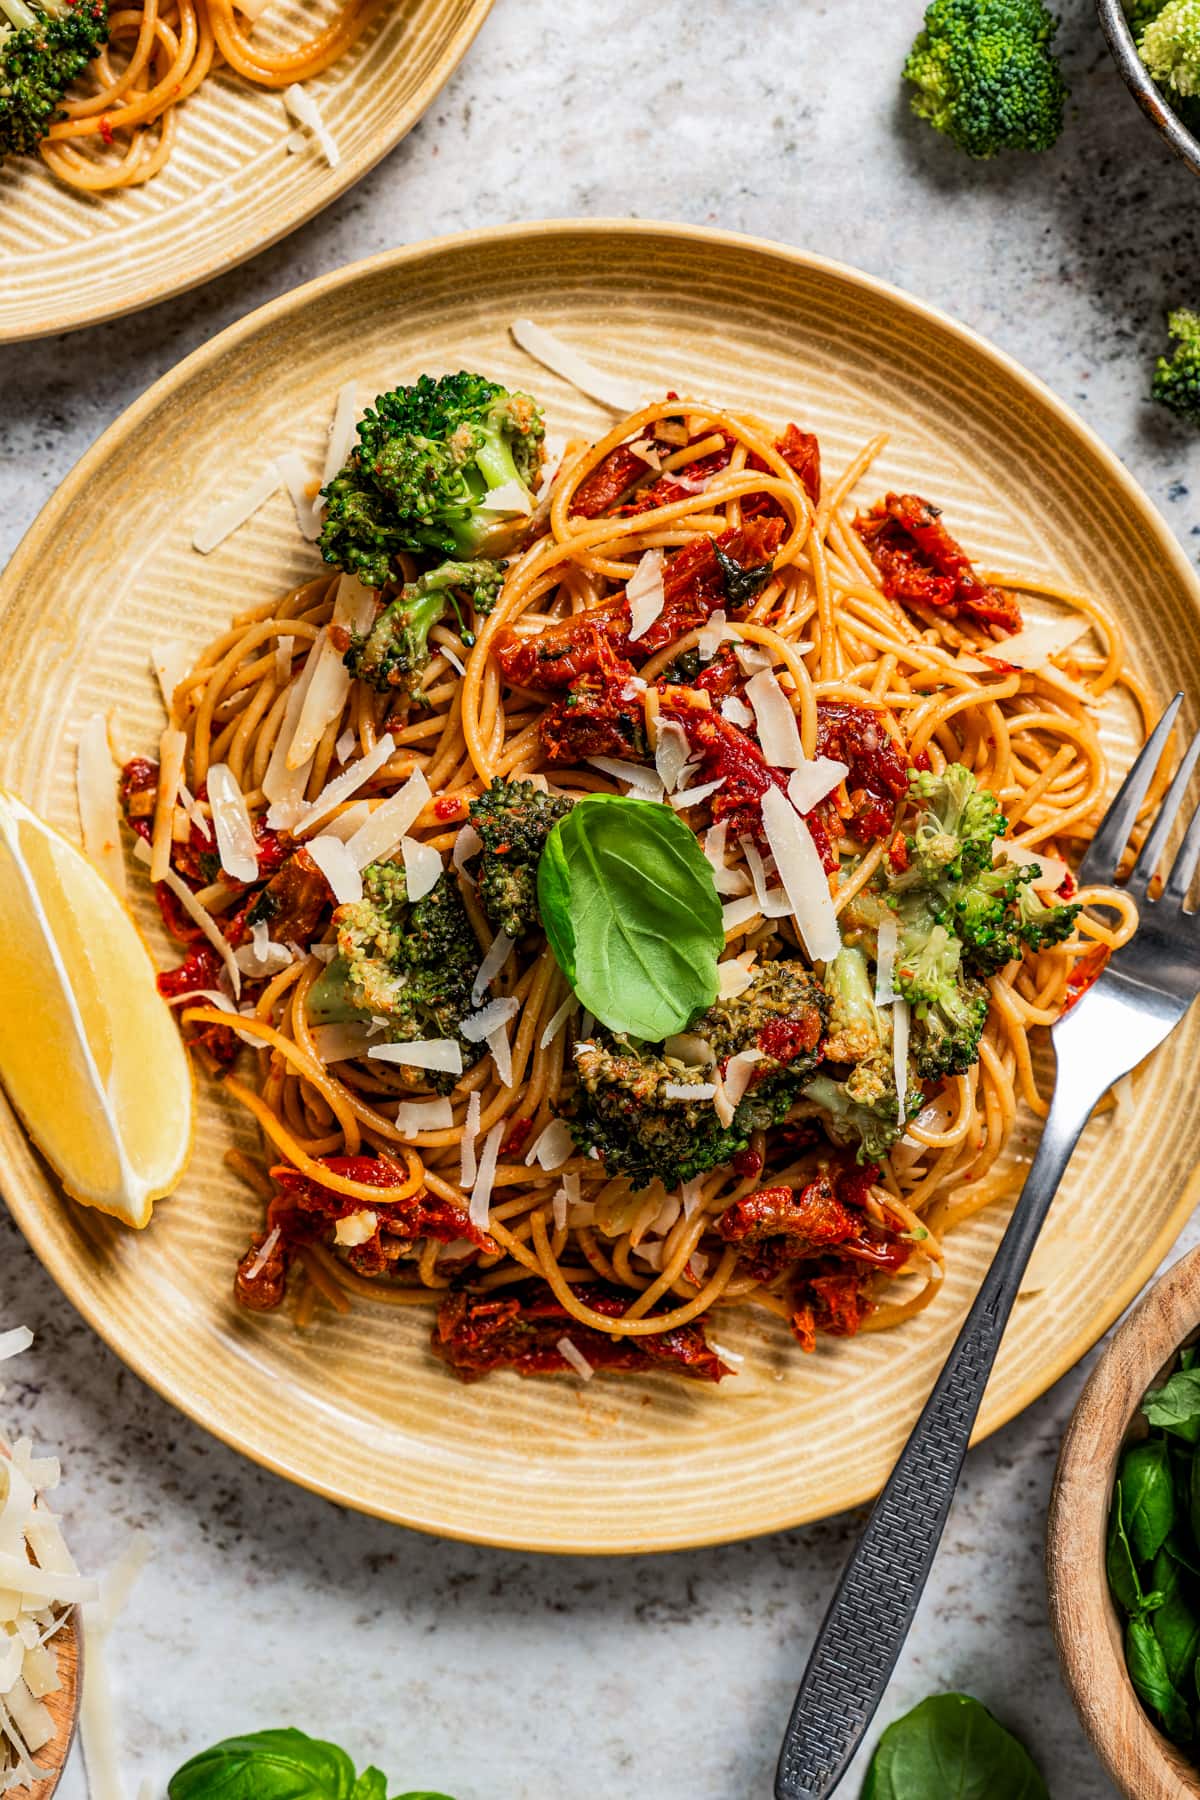 Sun-dried tomato pasta with broccoli served on a plate.